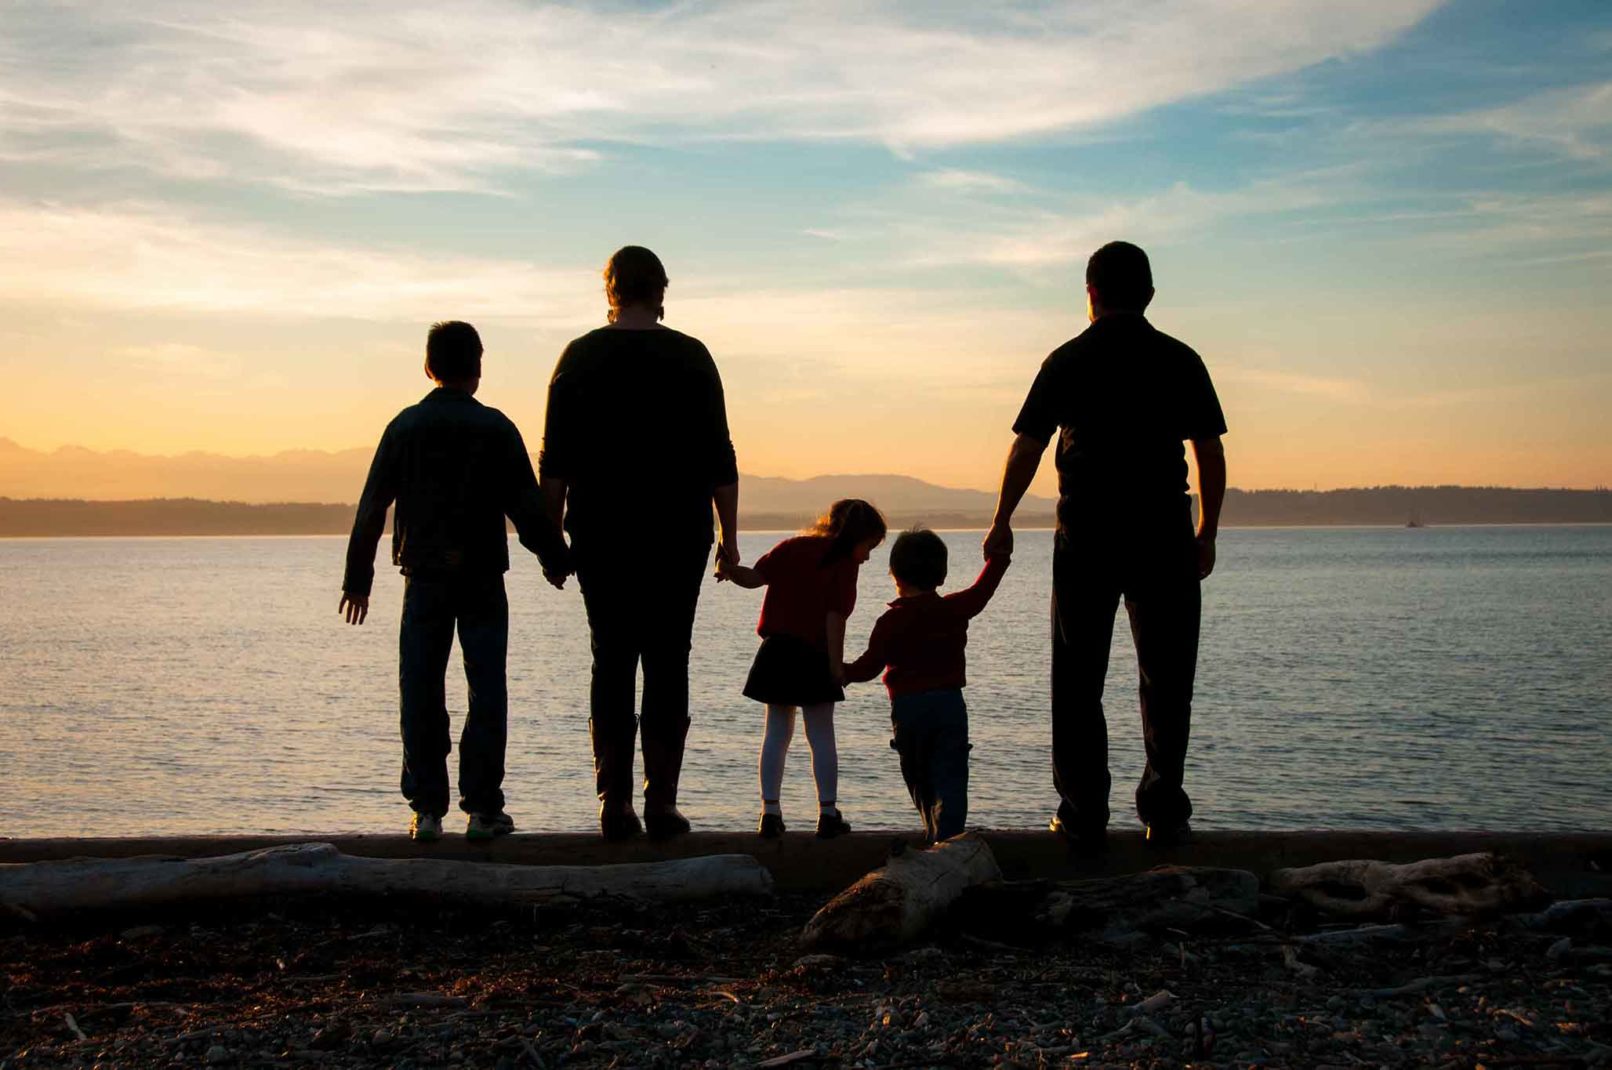 family portrait silhouette in the sunset overlooking a waterfront.